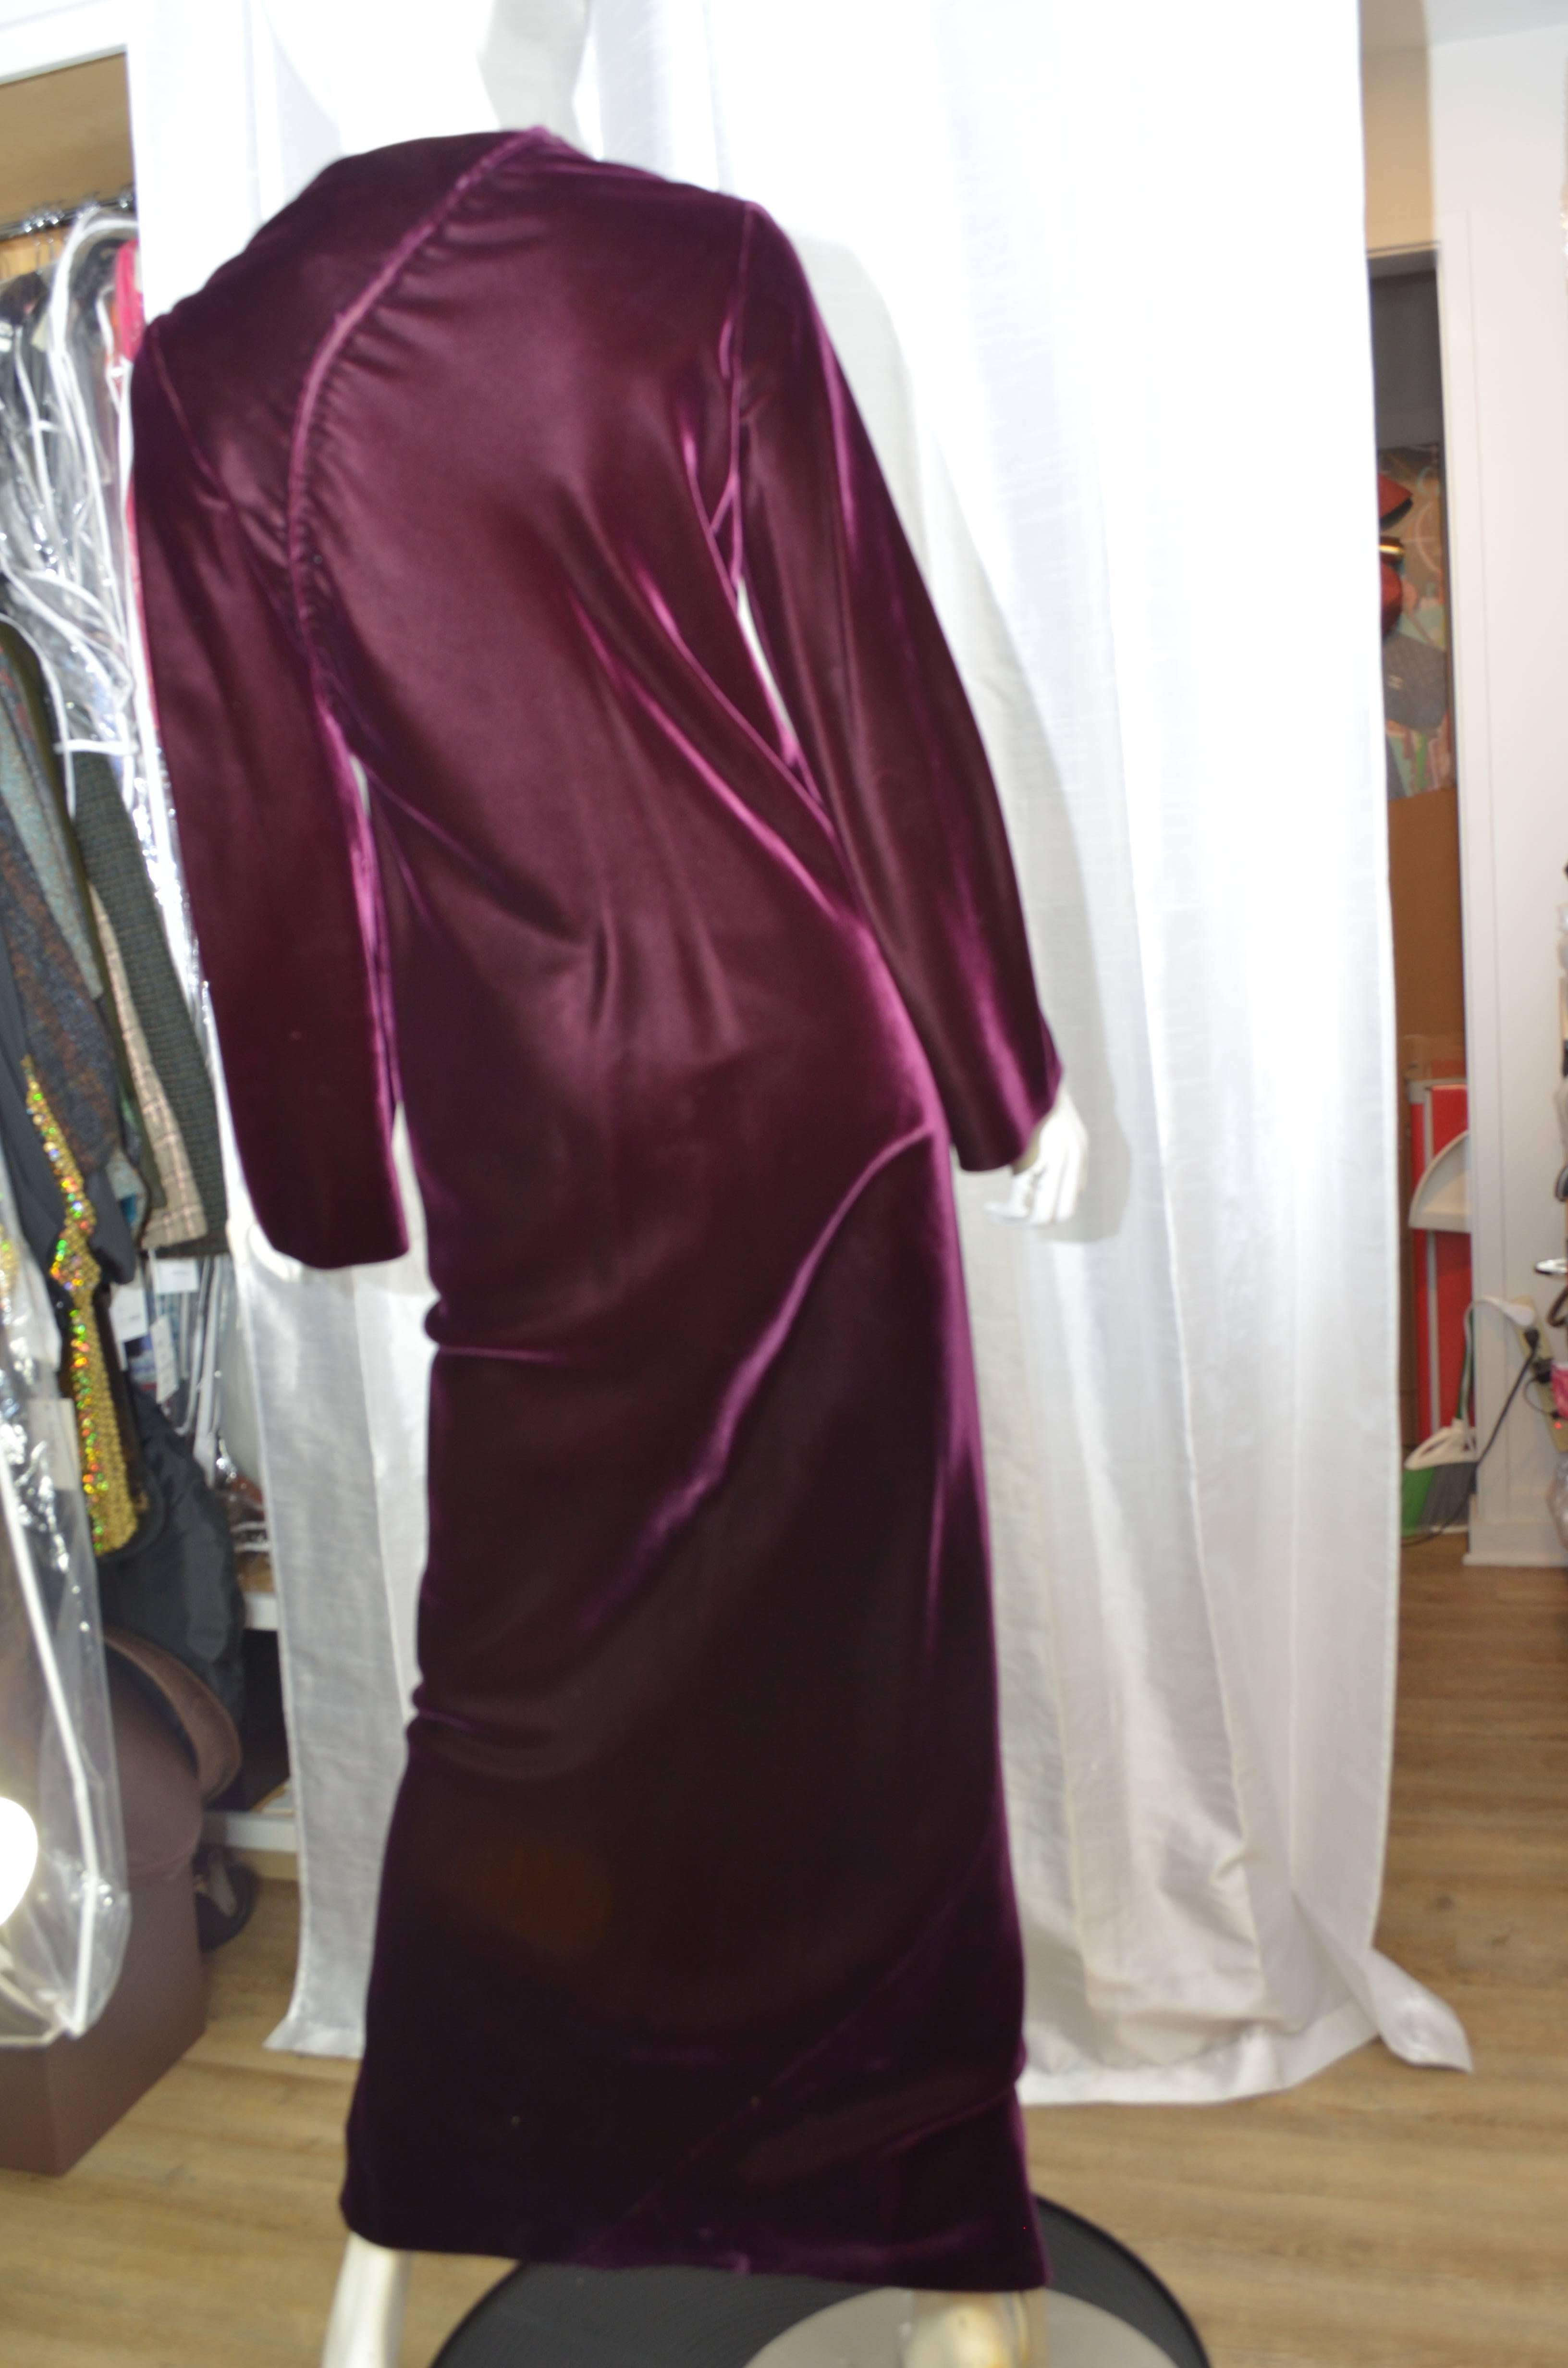 Fabulous vintage Halston gown in a beautiful burgundy silk velvet. This full-length, long flared sleeve dress features a gorgeous soft silk velvet cut on the bias, hand done diagonal zipper in the back. Fully lined. Please see images for